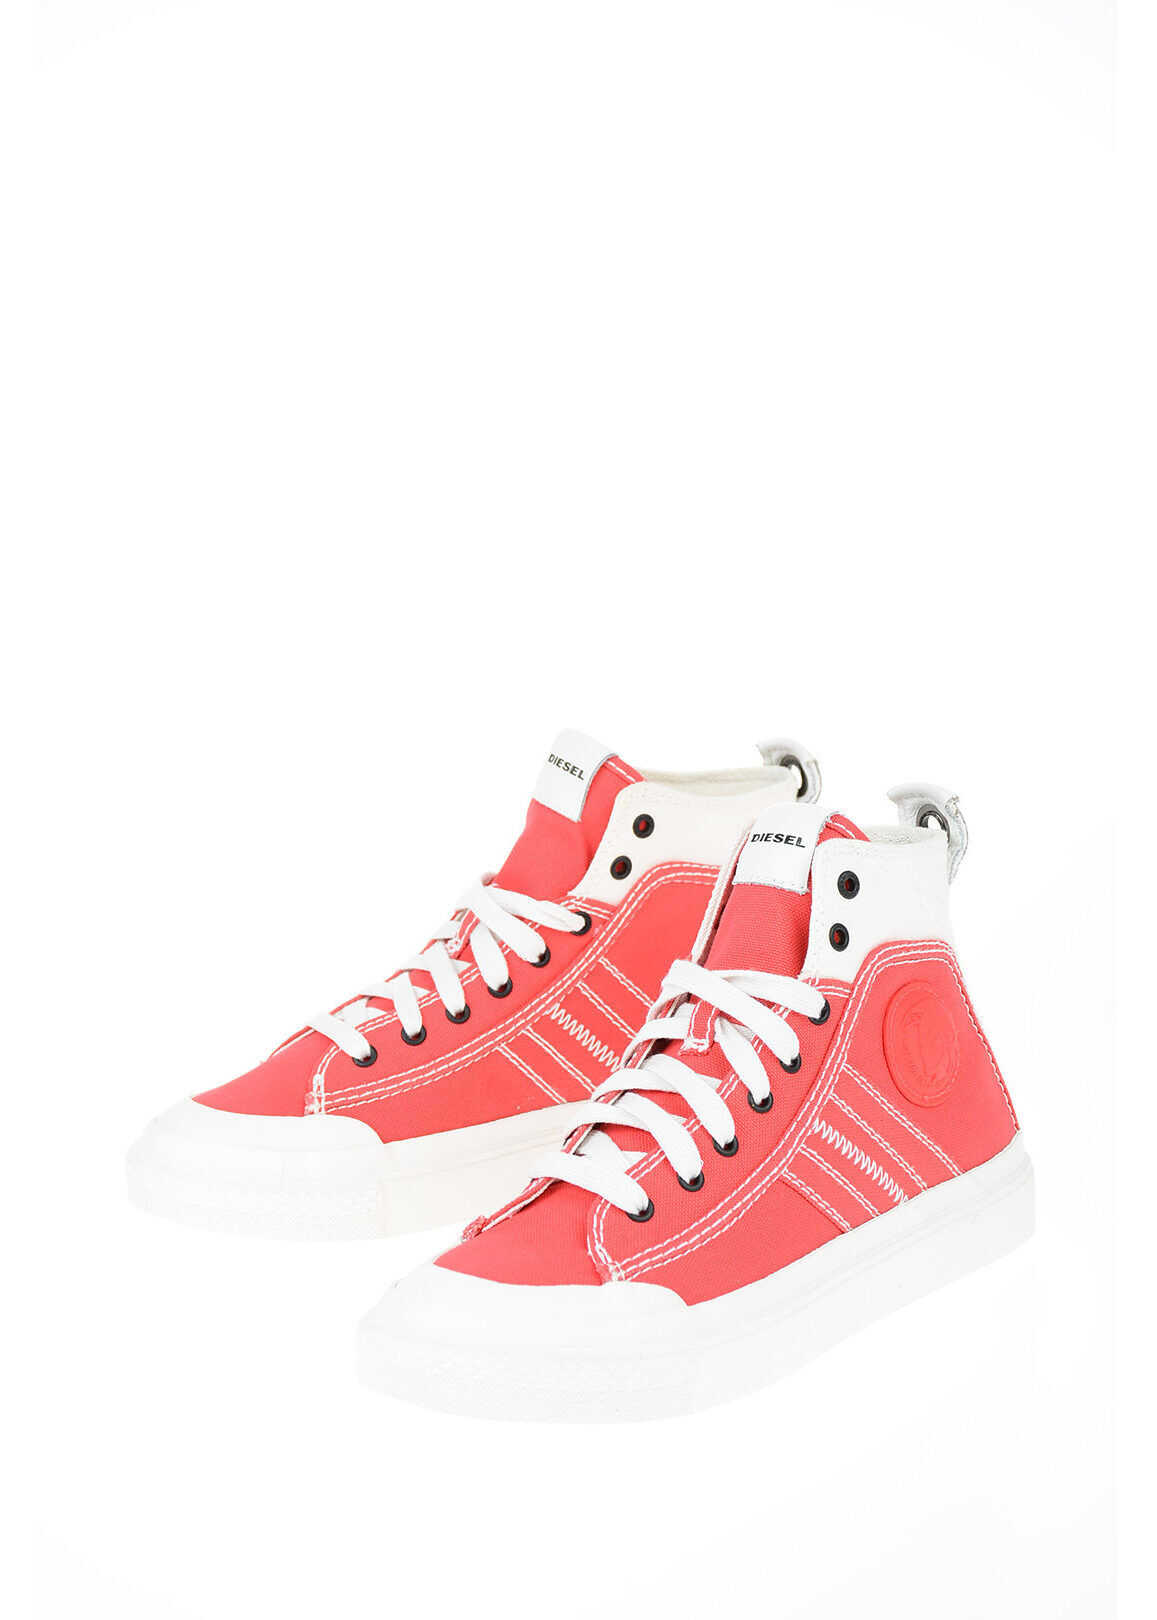 Diesel ASTICO S-ASTICO MID LACE Sneakers* RED